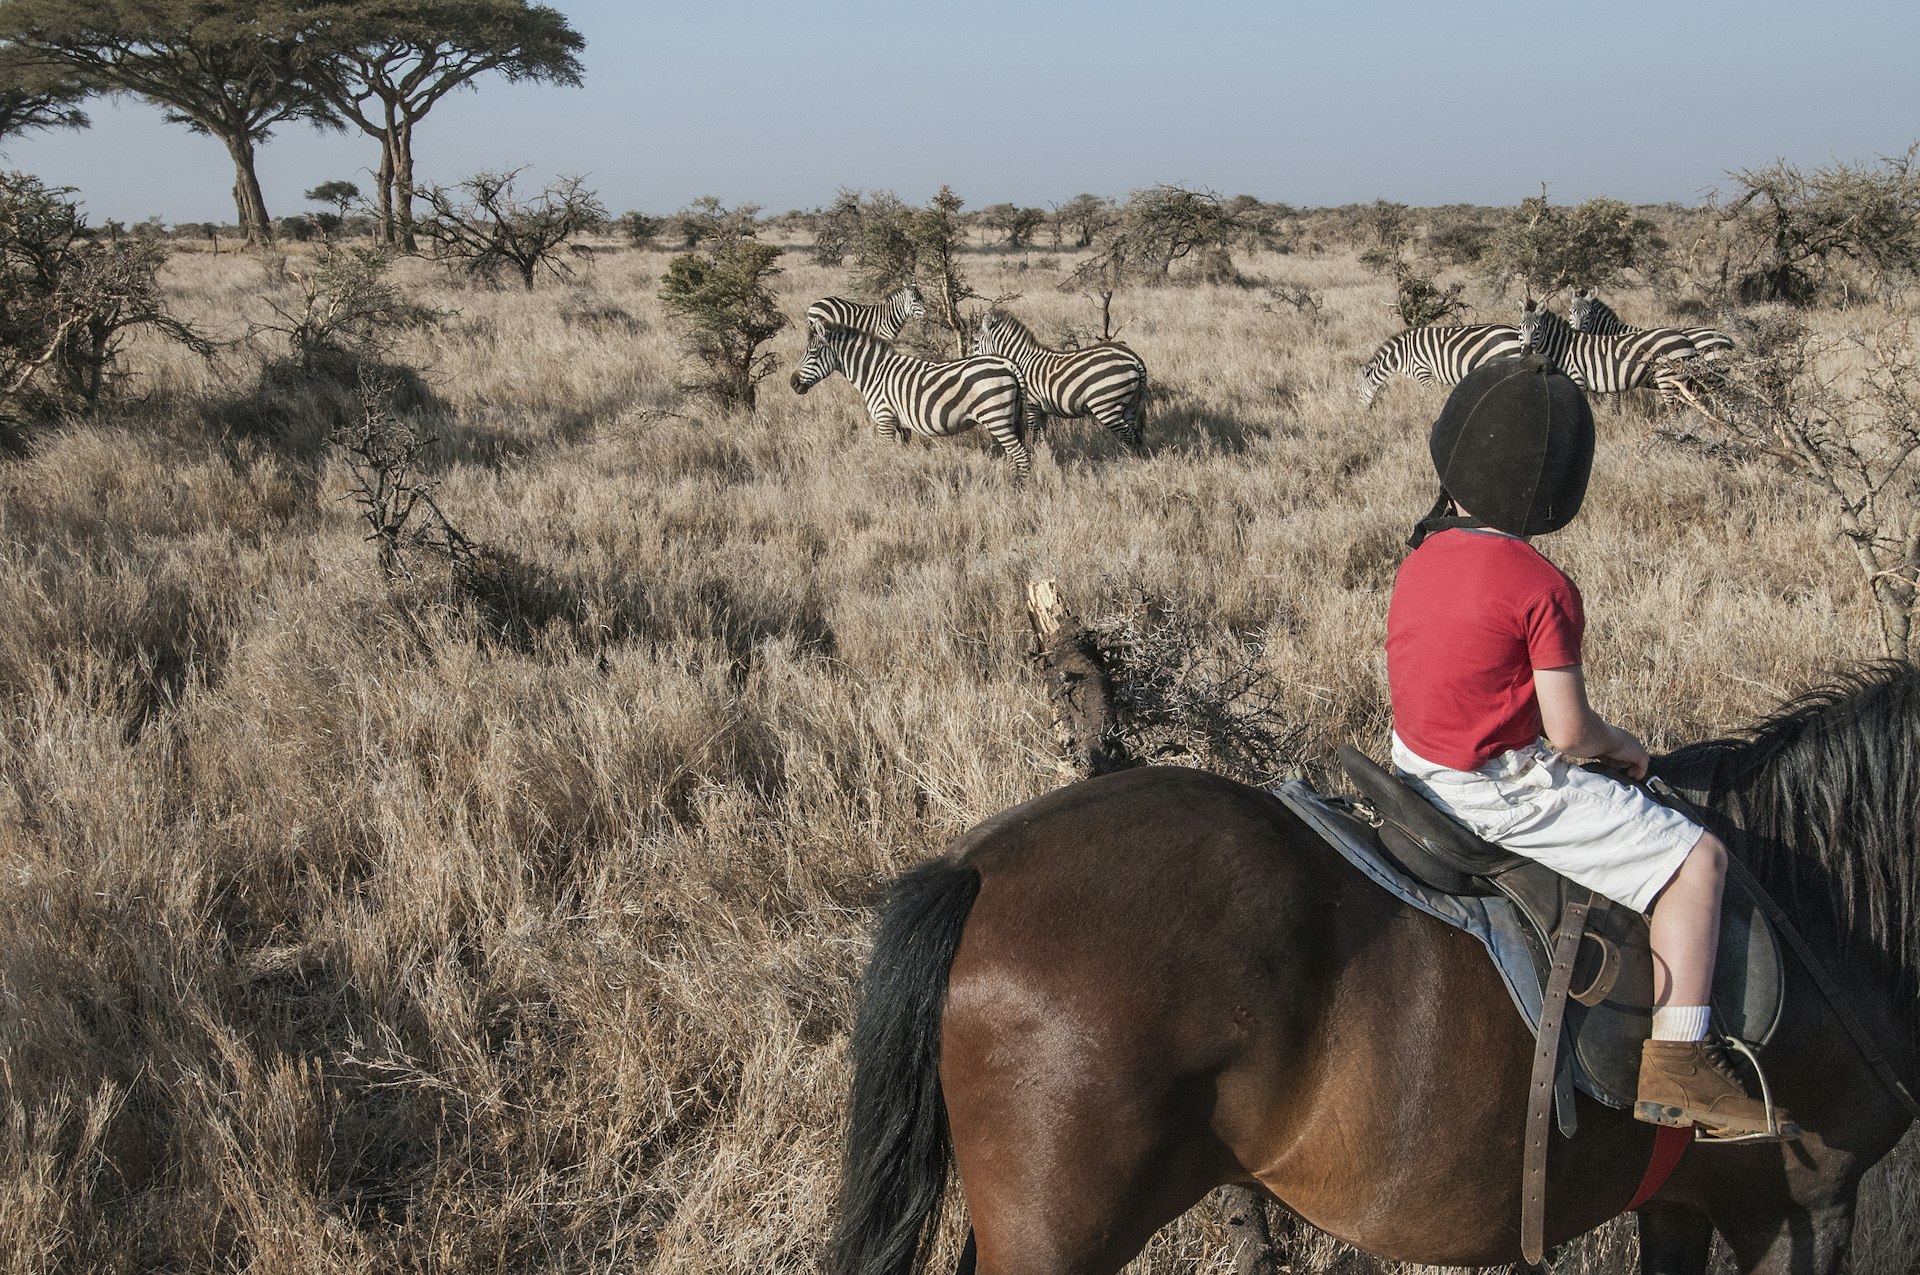 A young boy on a horse in the bush watching zebras in Kenya